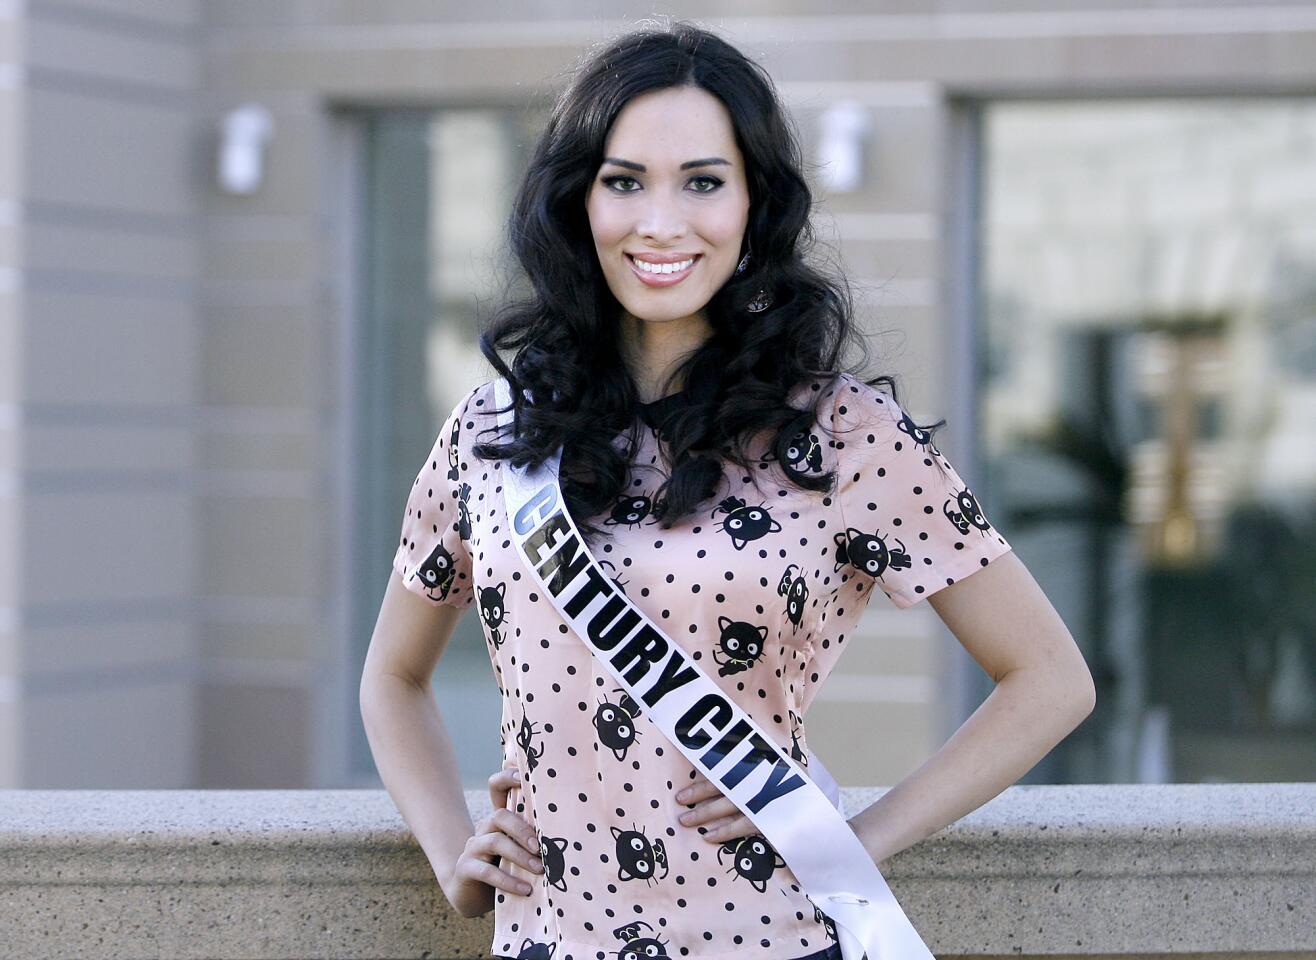 Kylan-Arianna Wenzel, 26 of Century City, the first transgendered contestant in any Miss USA pageant, just prior to the first day of the Miss California USA 2013 pageant at the Pasadena Convention Center in Pasadena on Saturday, January 12, 2013.